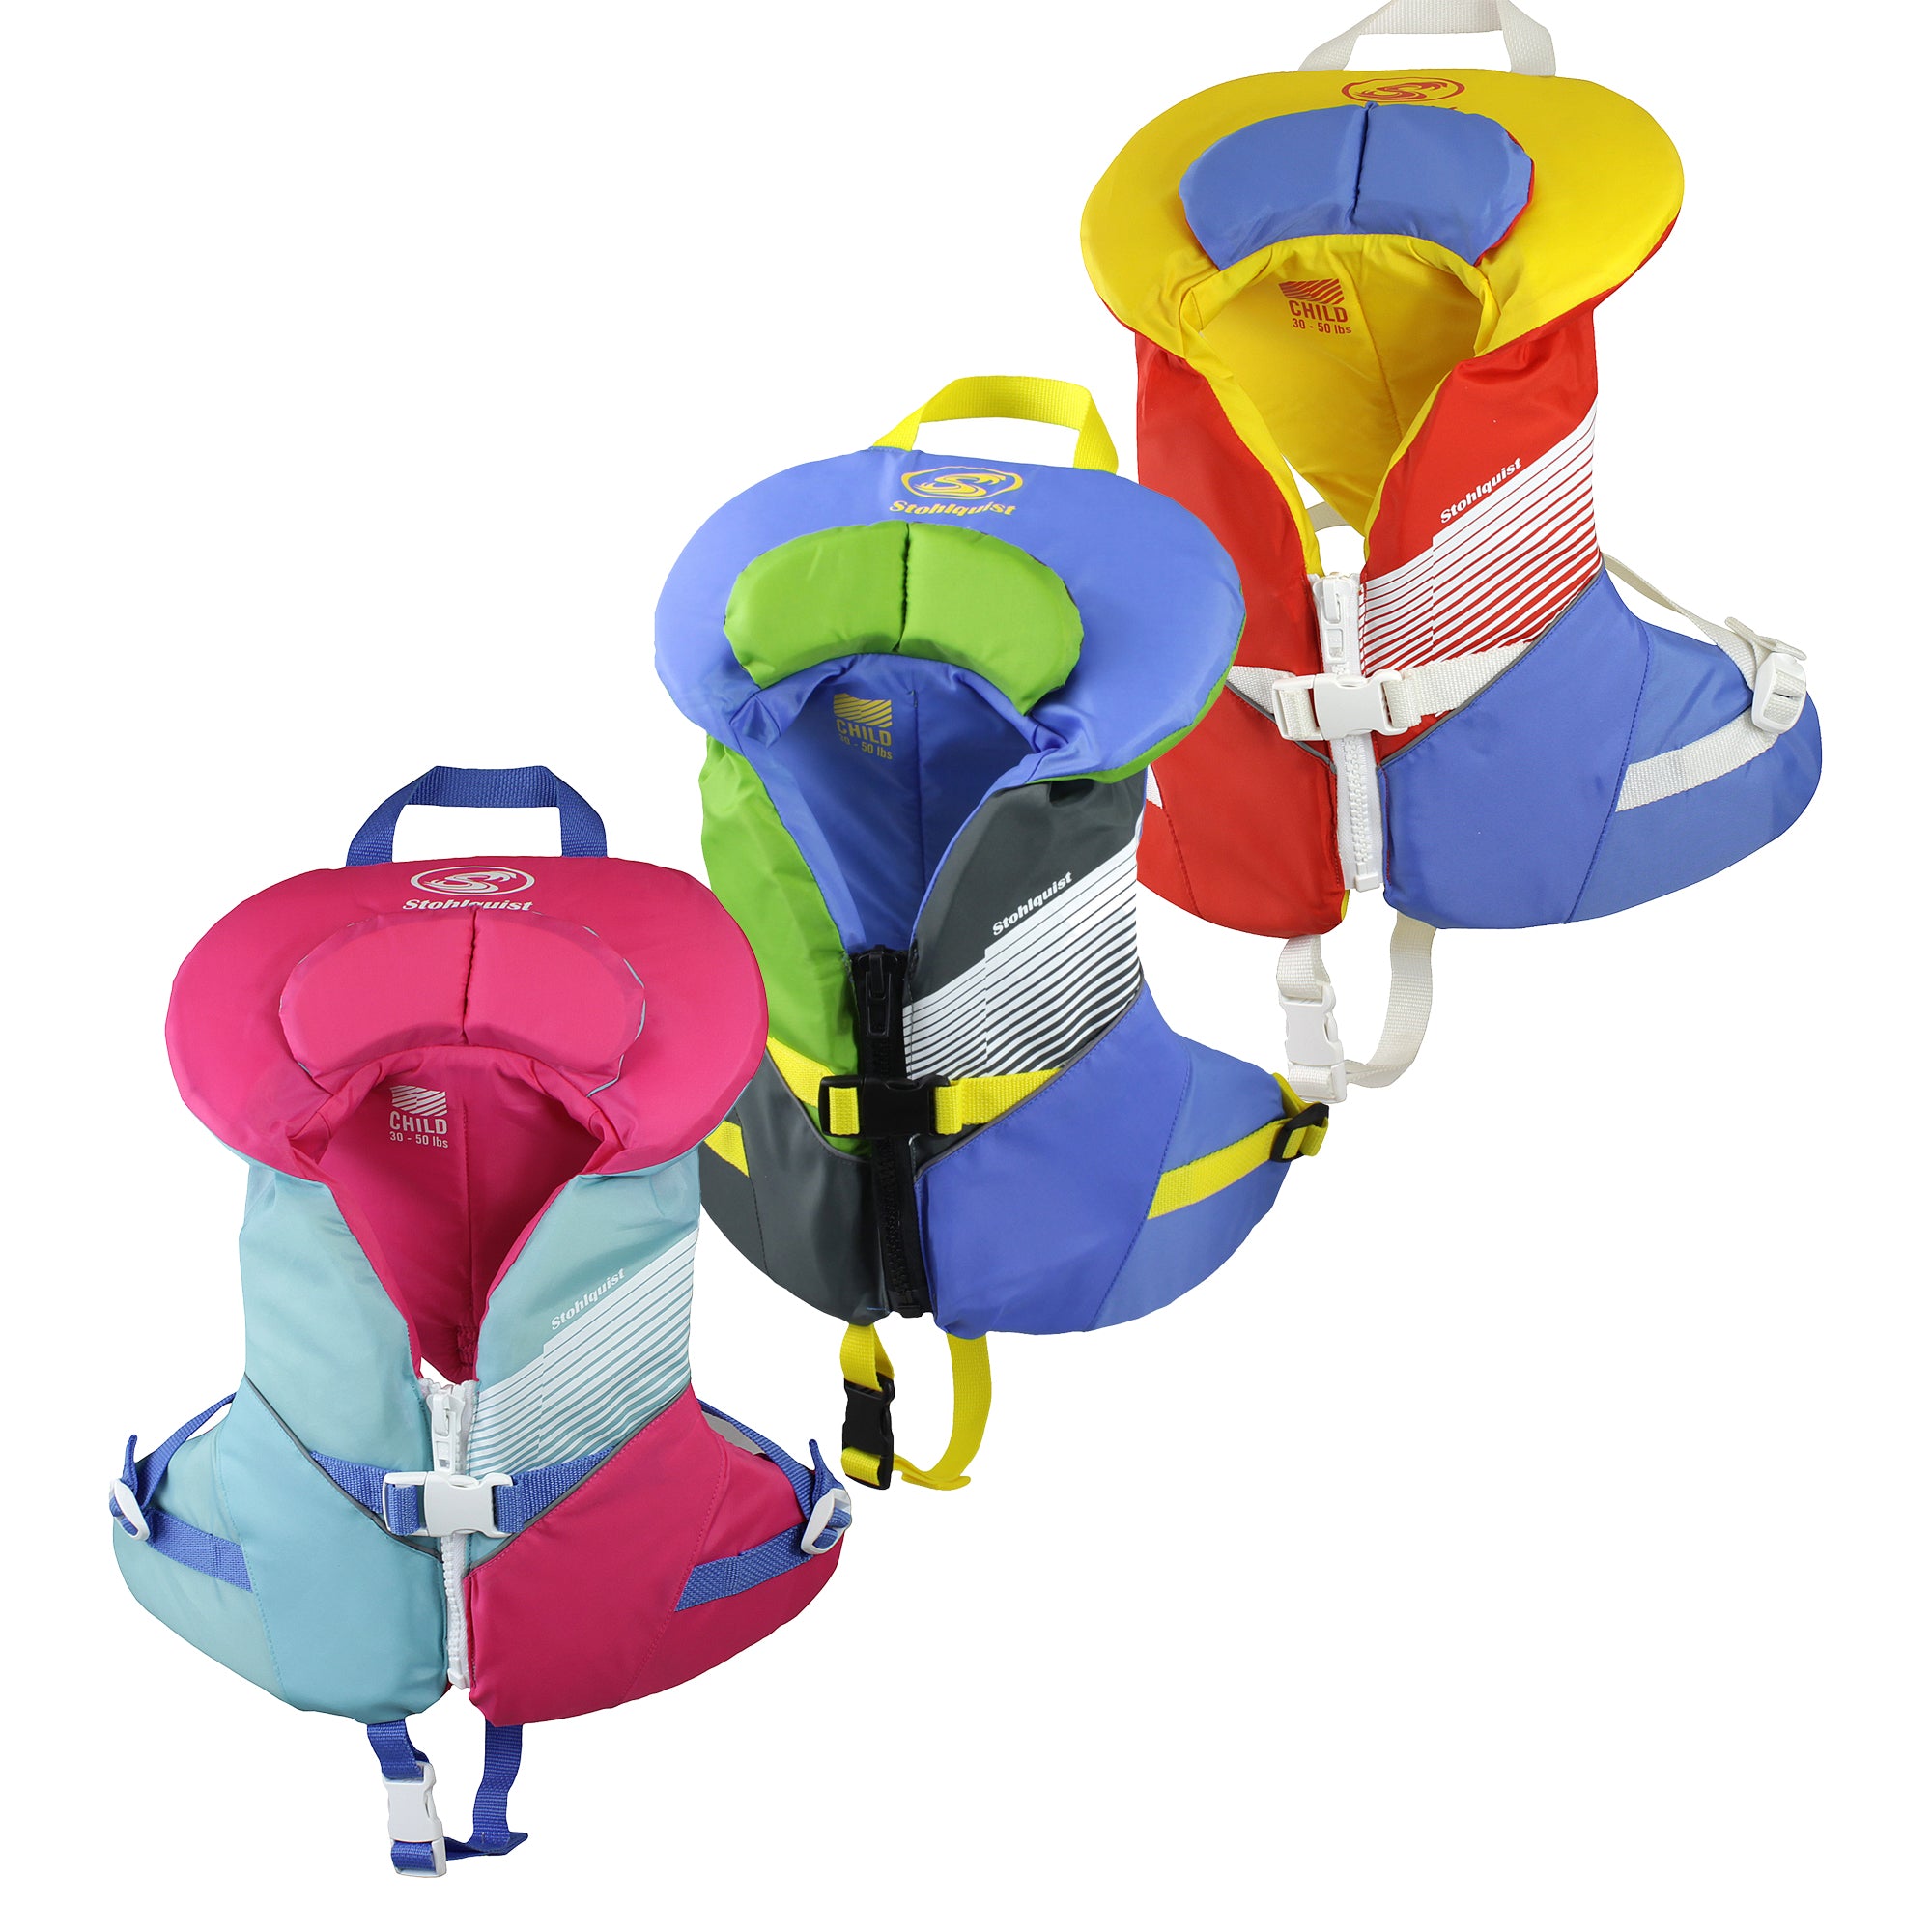 Stohlquist Child (30-50Lbs.) PFD - Gear For Adventure